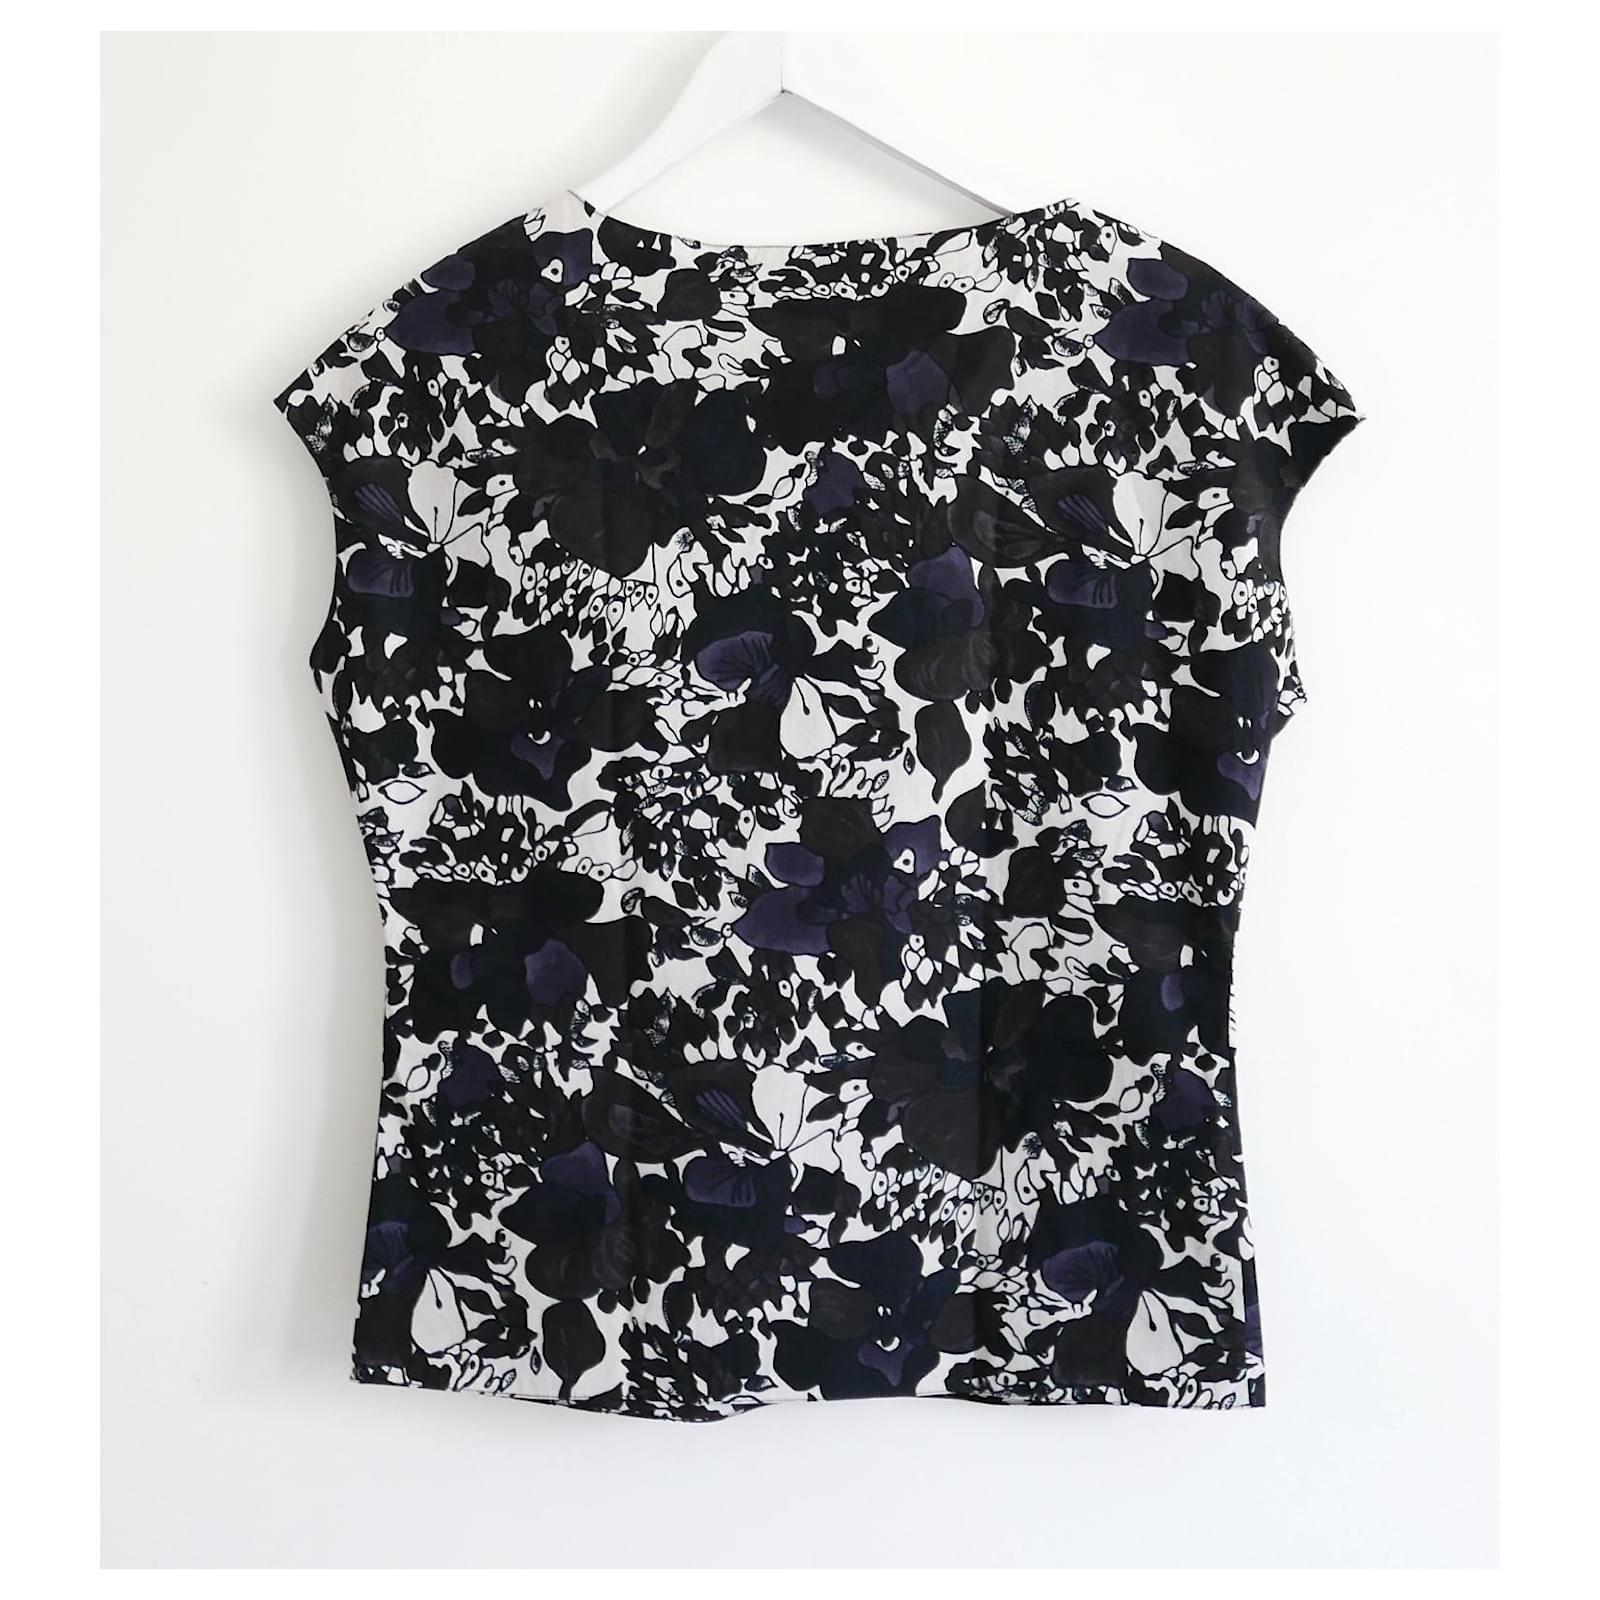 Marni Archival Black & Grey Floral Top In Excellent Condition For Sale In London, GB